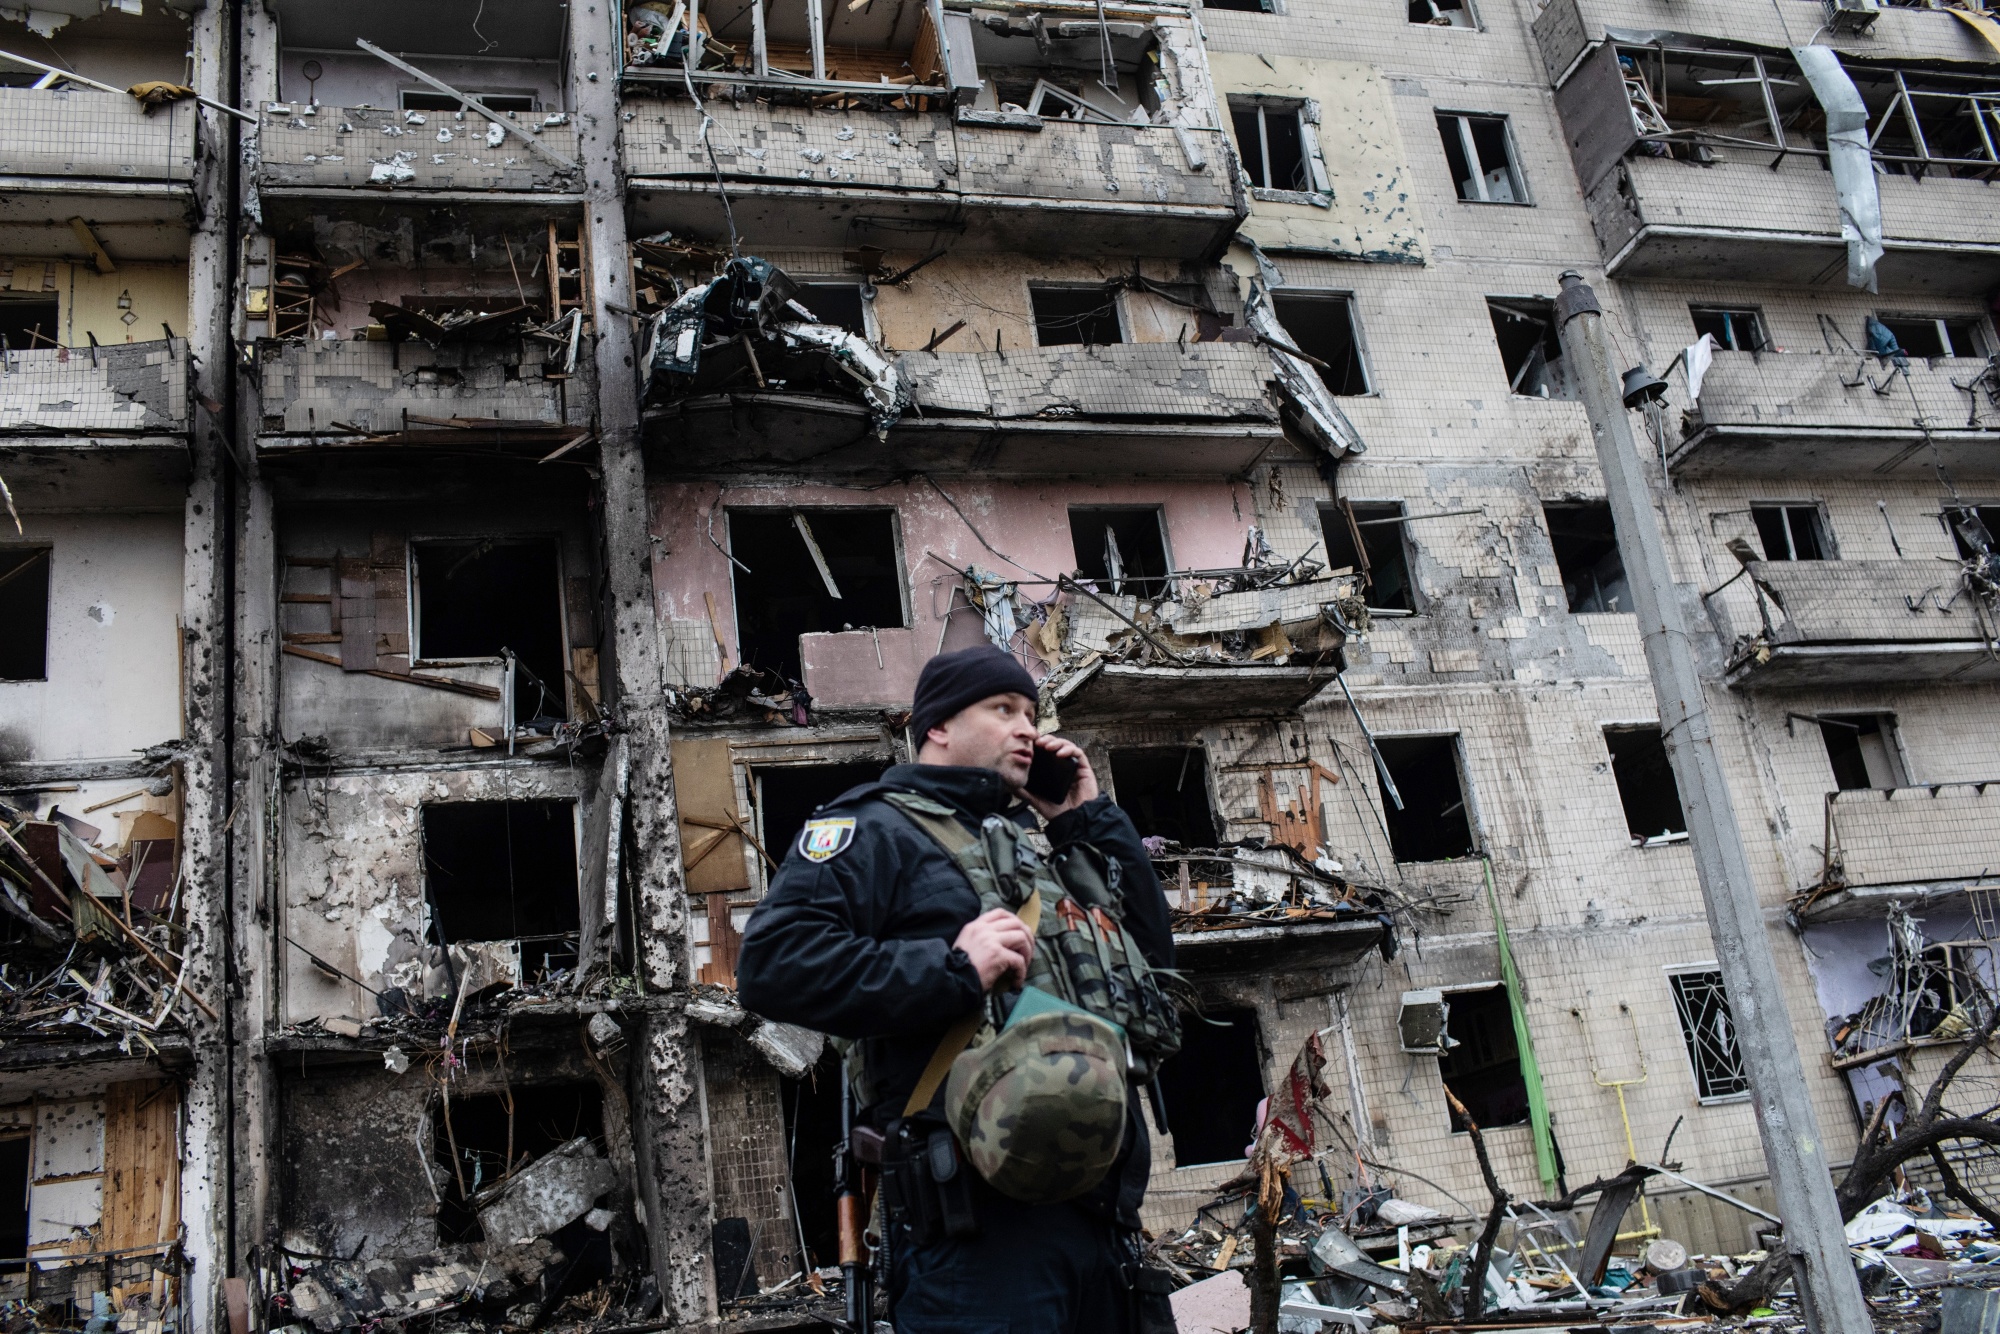 A policeman outside a residential building hit by Russian artillery strikes on Kyiv, Ukraine, on Feb. 25. Ukraine’s president said Kremlin forces were continuing attacks on military and civilian targets on the second day of their invasion.